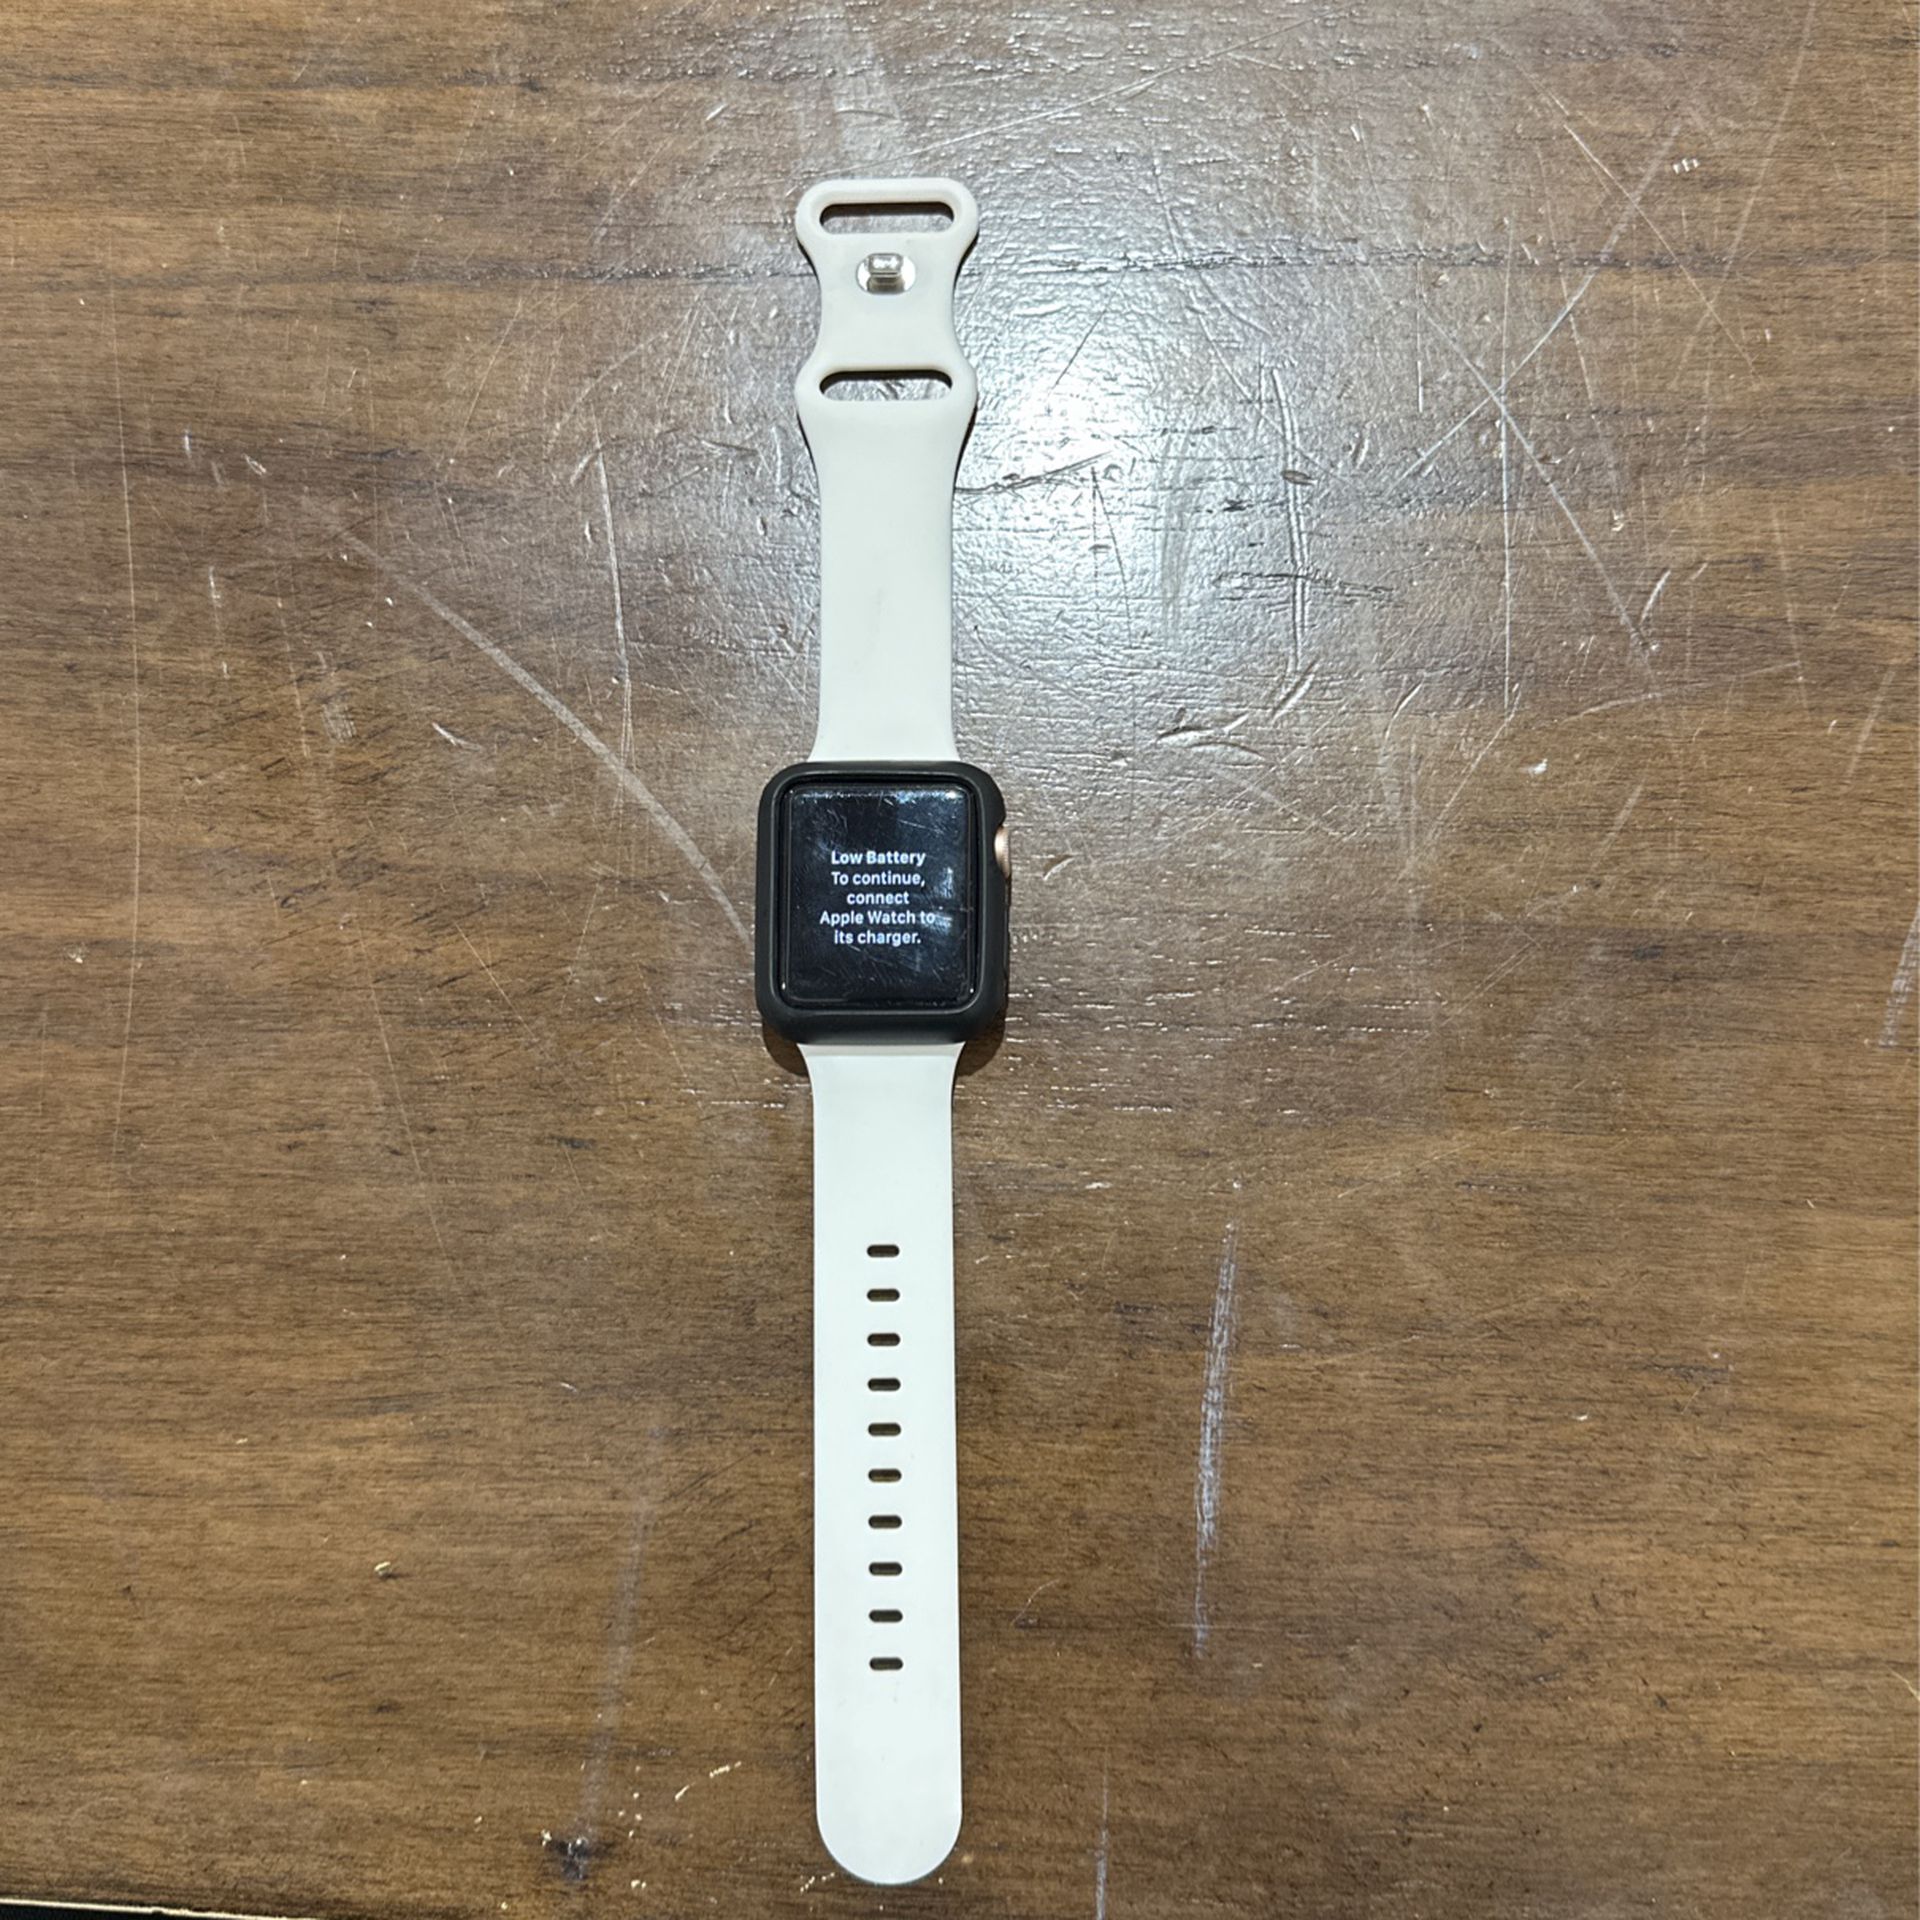 Apple Watch Series 3. (obo) Any Offers